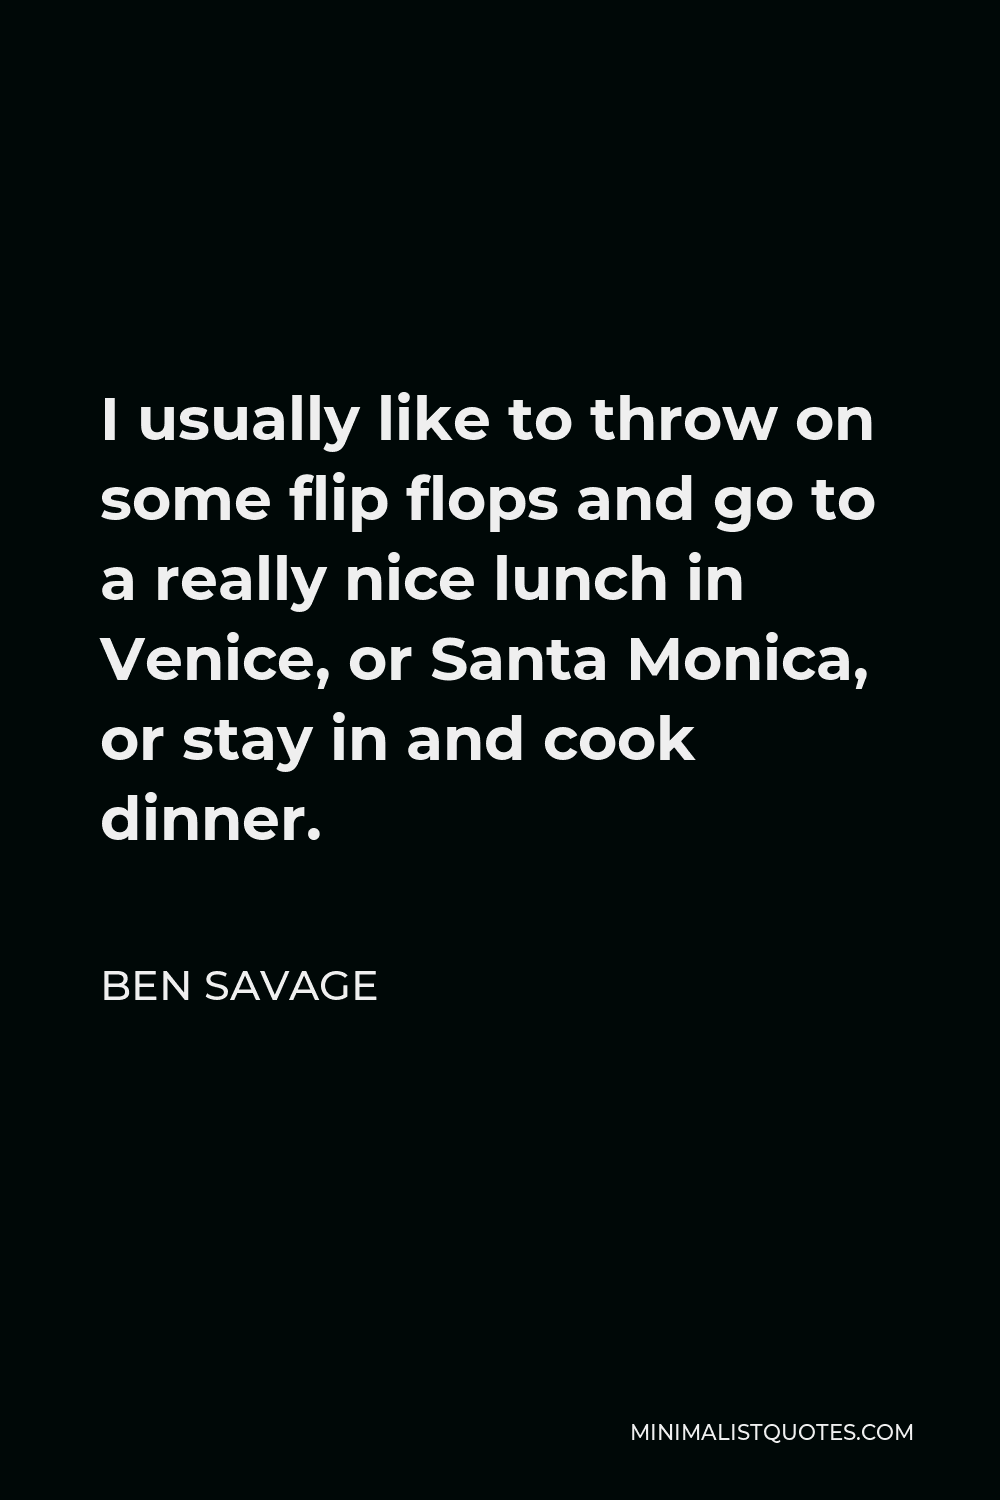 Ben Savage Quote - I usually like to throw on some flip flops and go to a really nice lunch in Venice, or Santa Monica, or stay in and cook dinner.